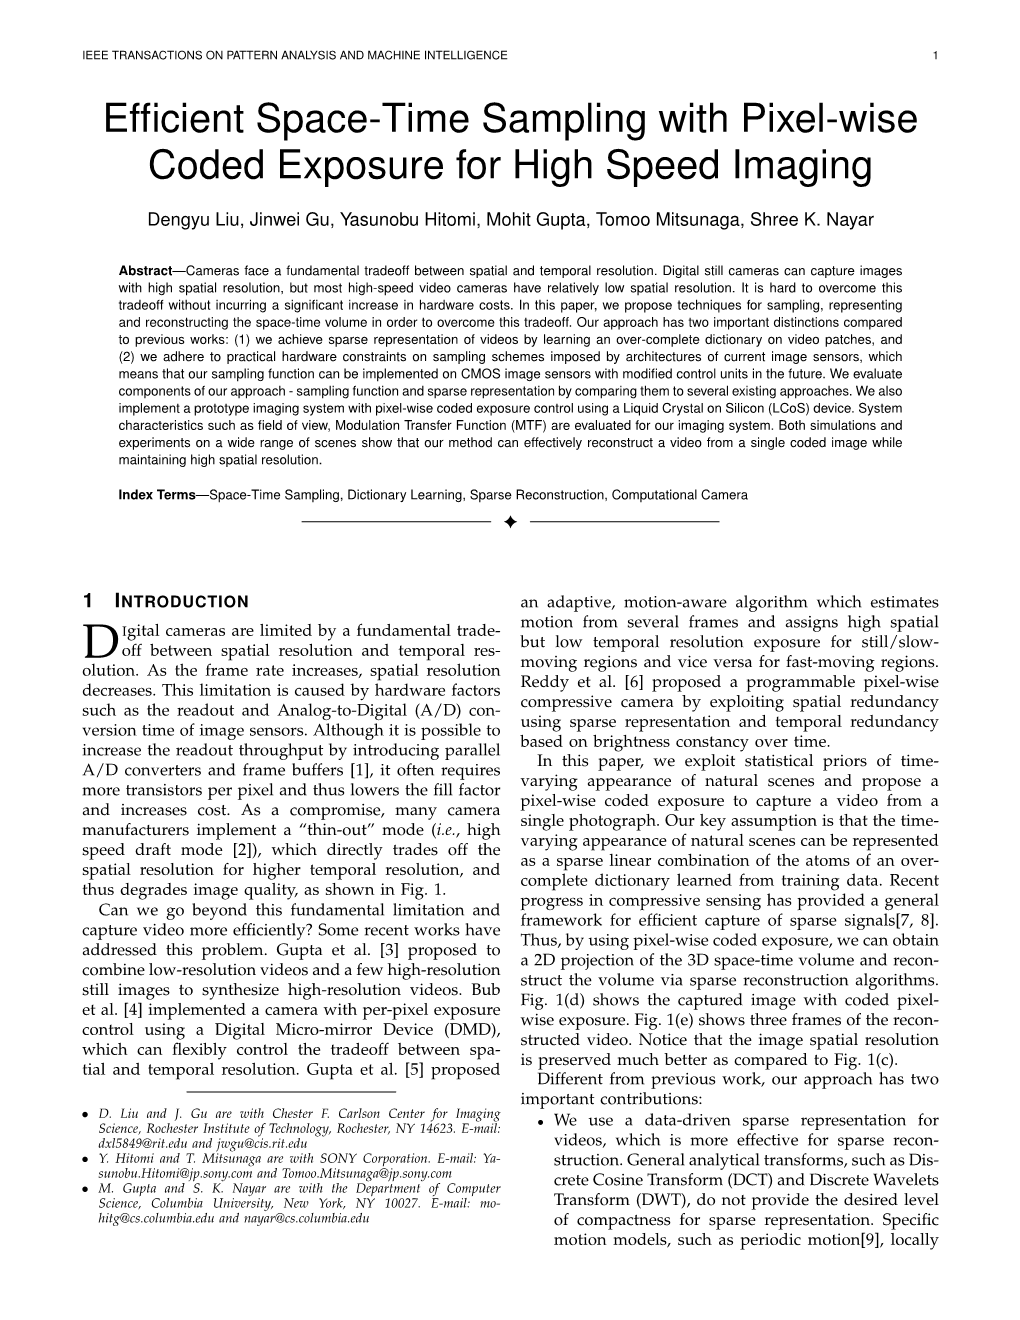 Efficient Space-Time Sampling with Pixel-Wise Coded Exposure For